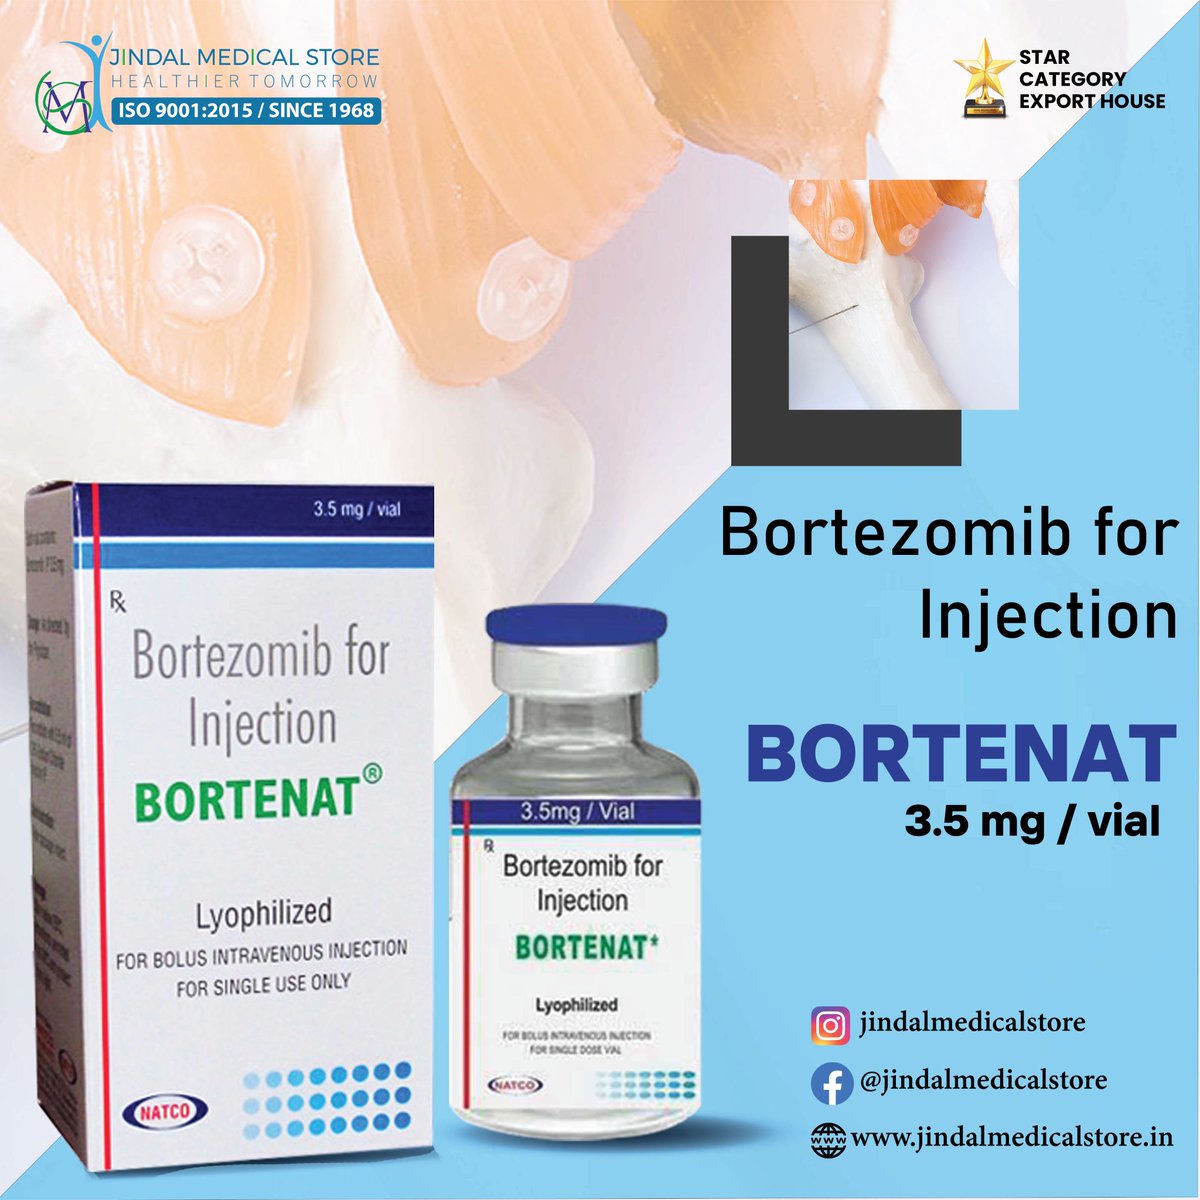 Fight against multiple myeloma and mantle-cell lymphoma with Bortenat 3.5mg Injection. Its powerful action halts cancer cell growth.

#Bortenat #CancerTreatment #TreatMultipleMyeloma #MantleCellLymphoma #Oncology #FightCancer #Chemotherapy #NeverGiveUp #JindalMedicalStore #JMS